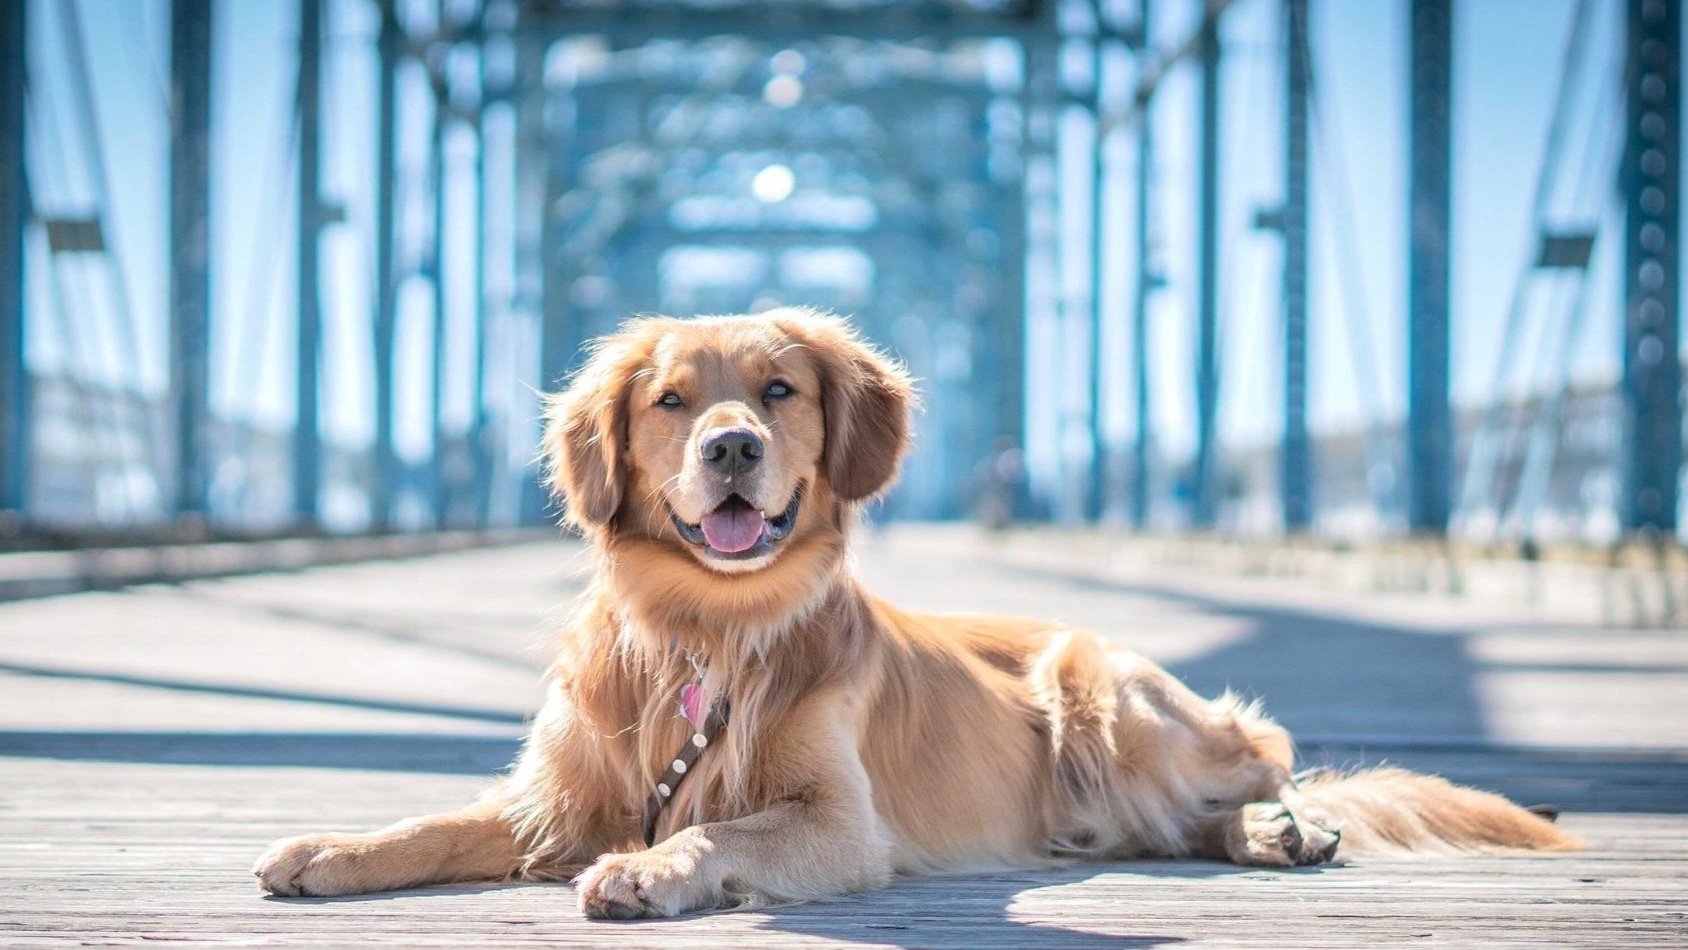 Dog for adoption - Penny, a Golden Retriever in Louisville, KY